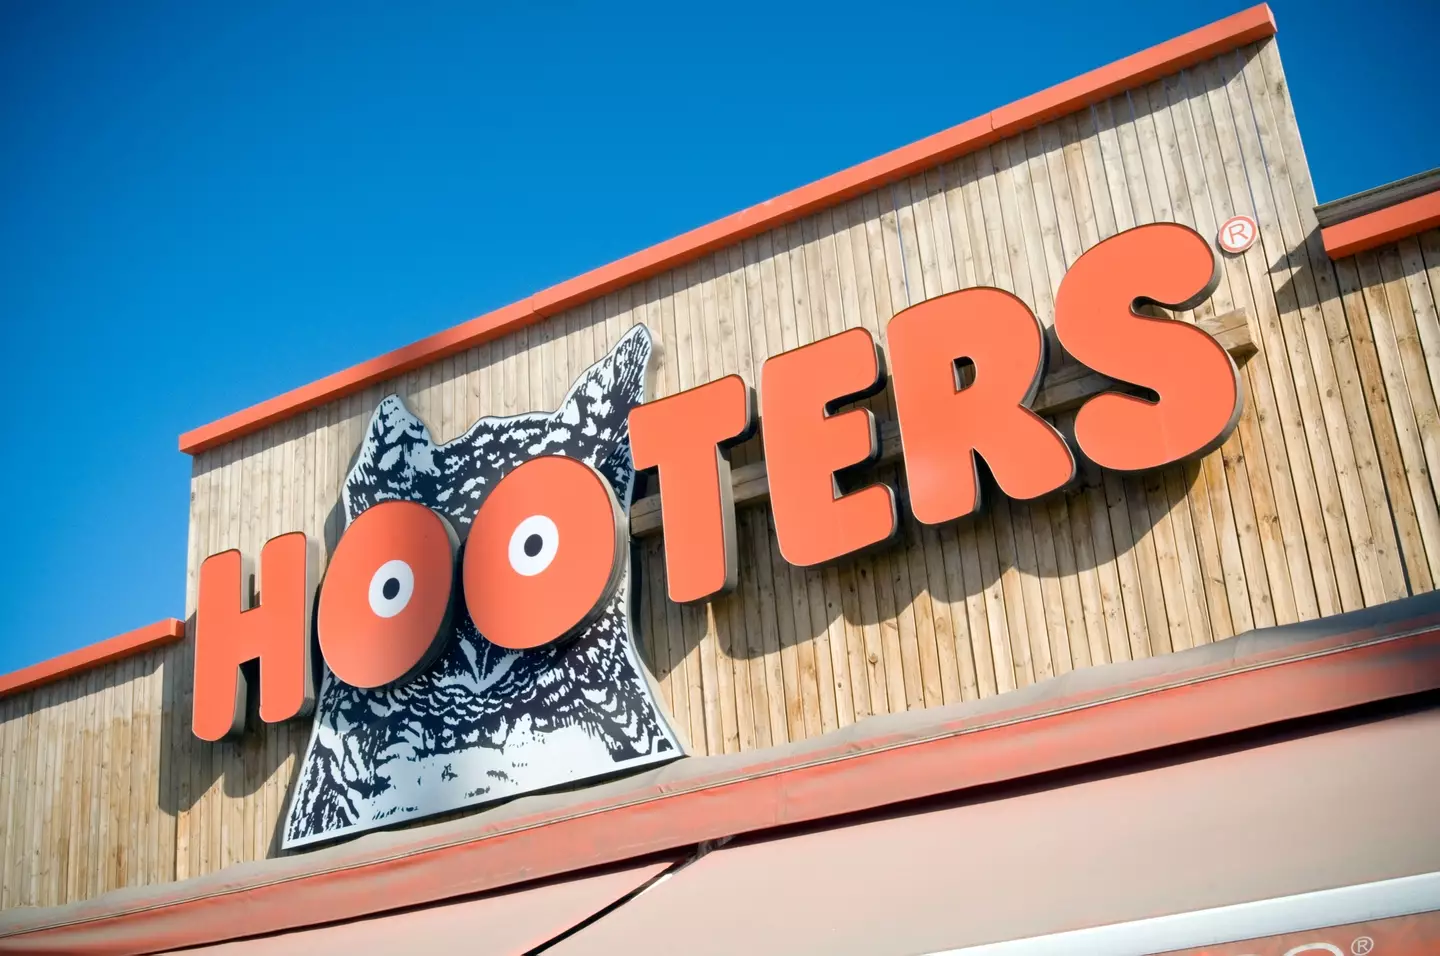 A Hooters waitress has revealed the offensive comments she’s received.